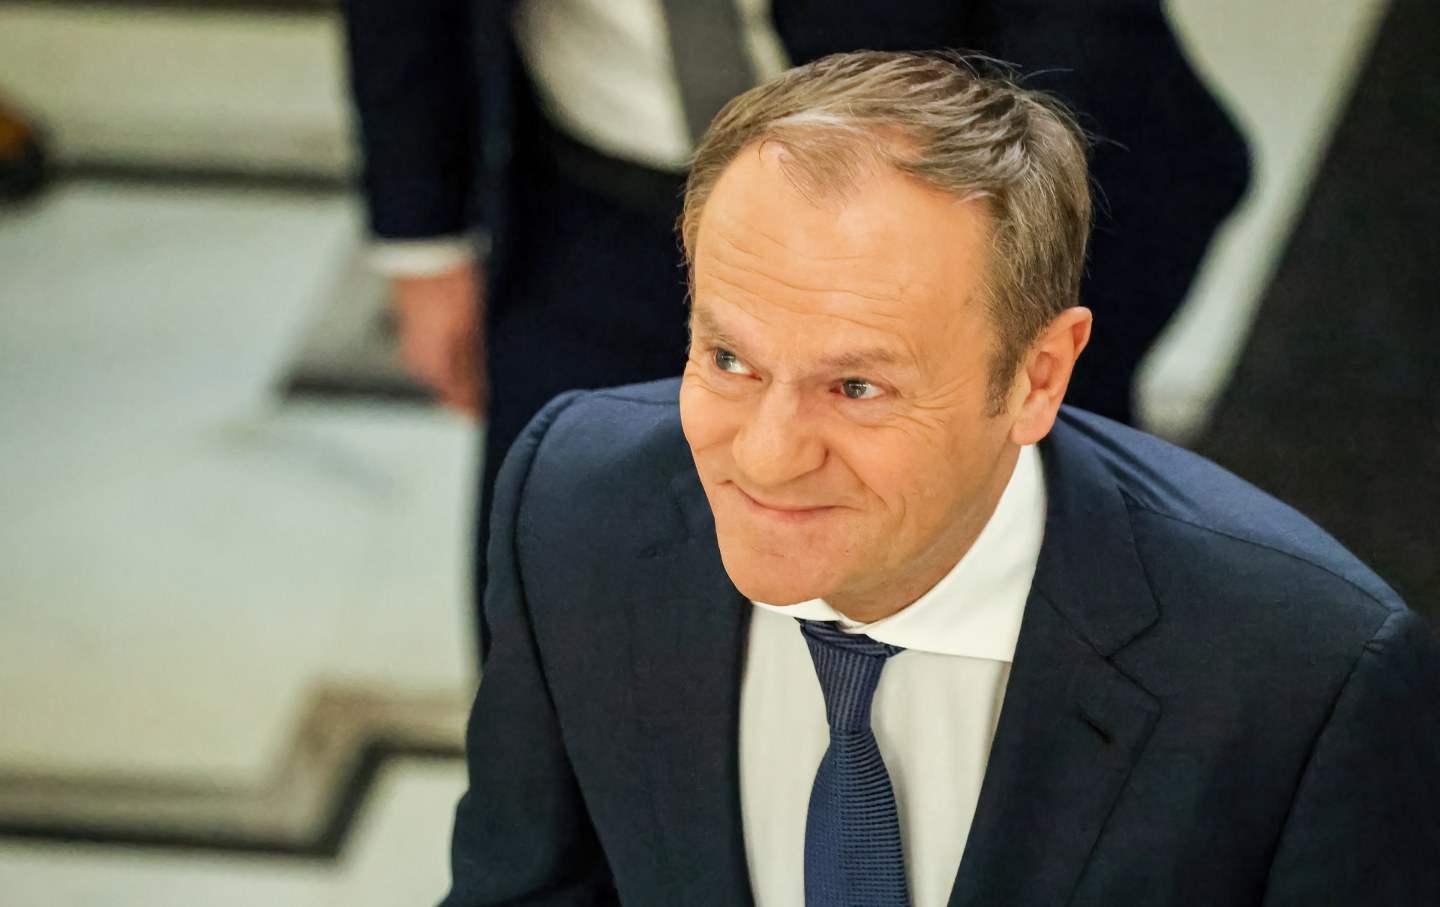 Polish Prime Minister Donald Tusk arrives on January 6, 2024, for the fourth session of the Polish Parliament, which takes place amid chaos created by legal disagreement with the previous government.